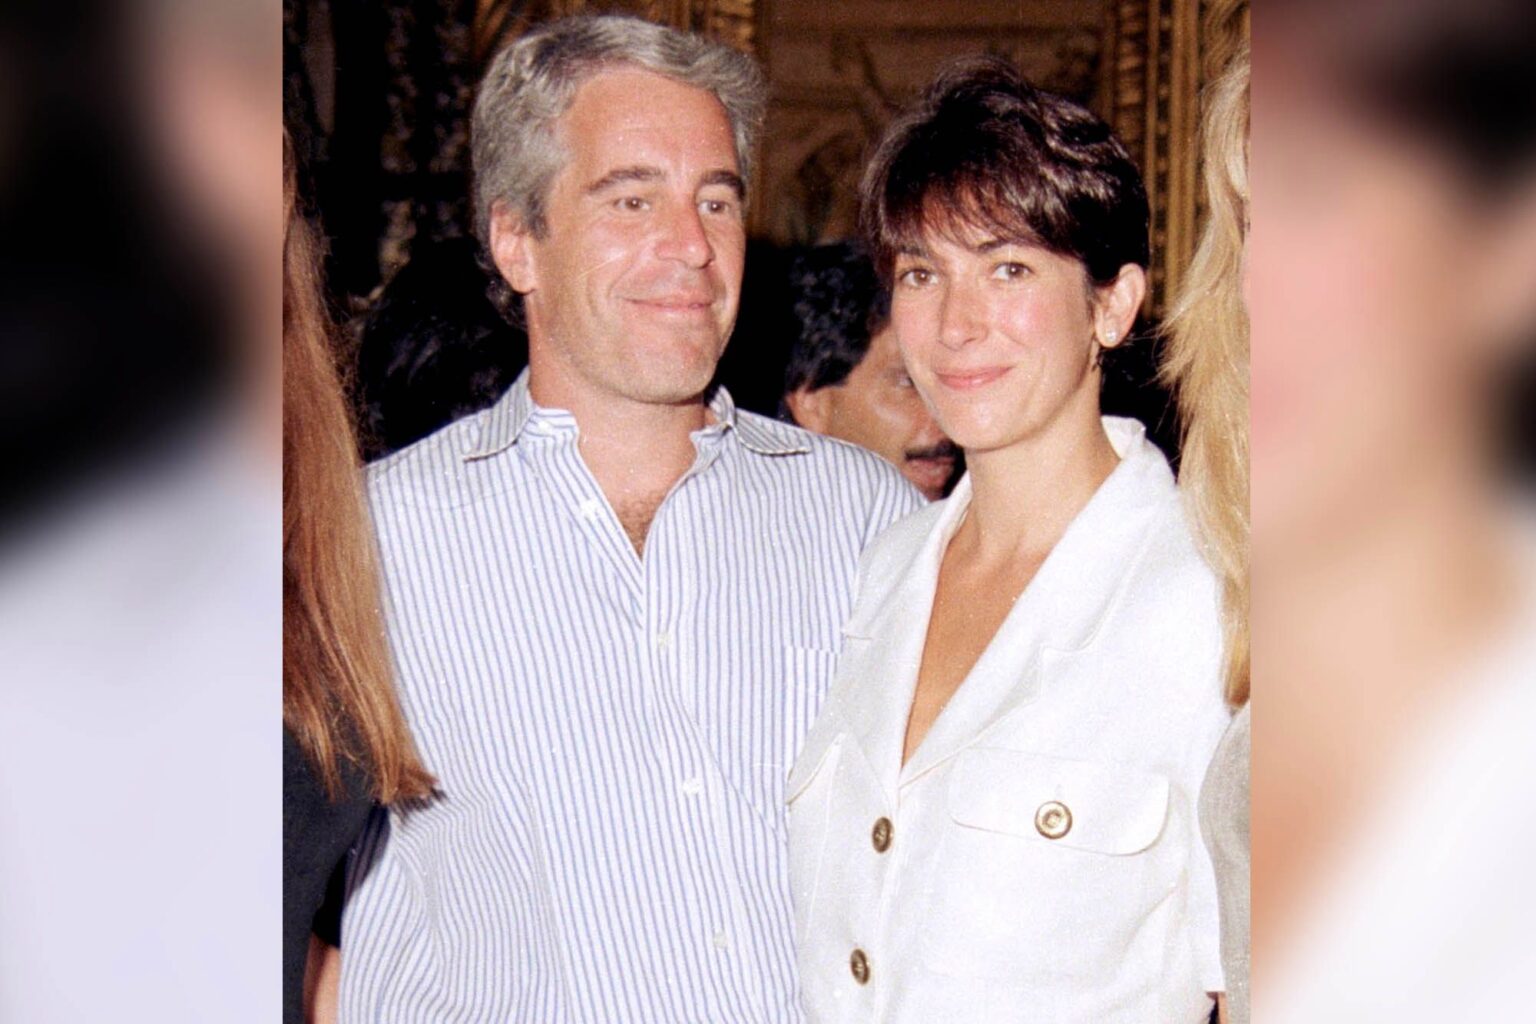 One of Ghislaine Maxwell's accusers says she told them to "give Jeffrey what he wants". When and where could this have happened?